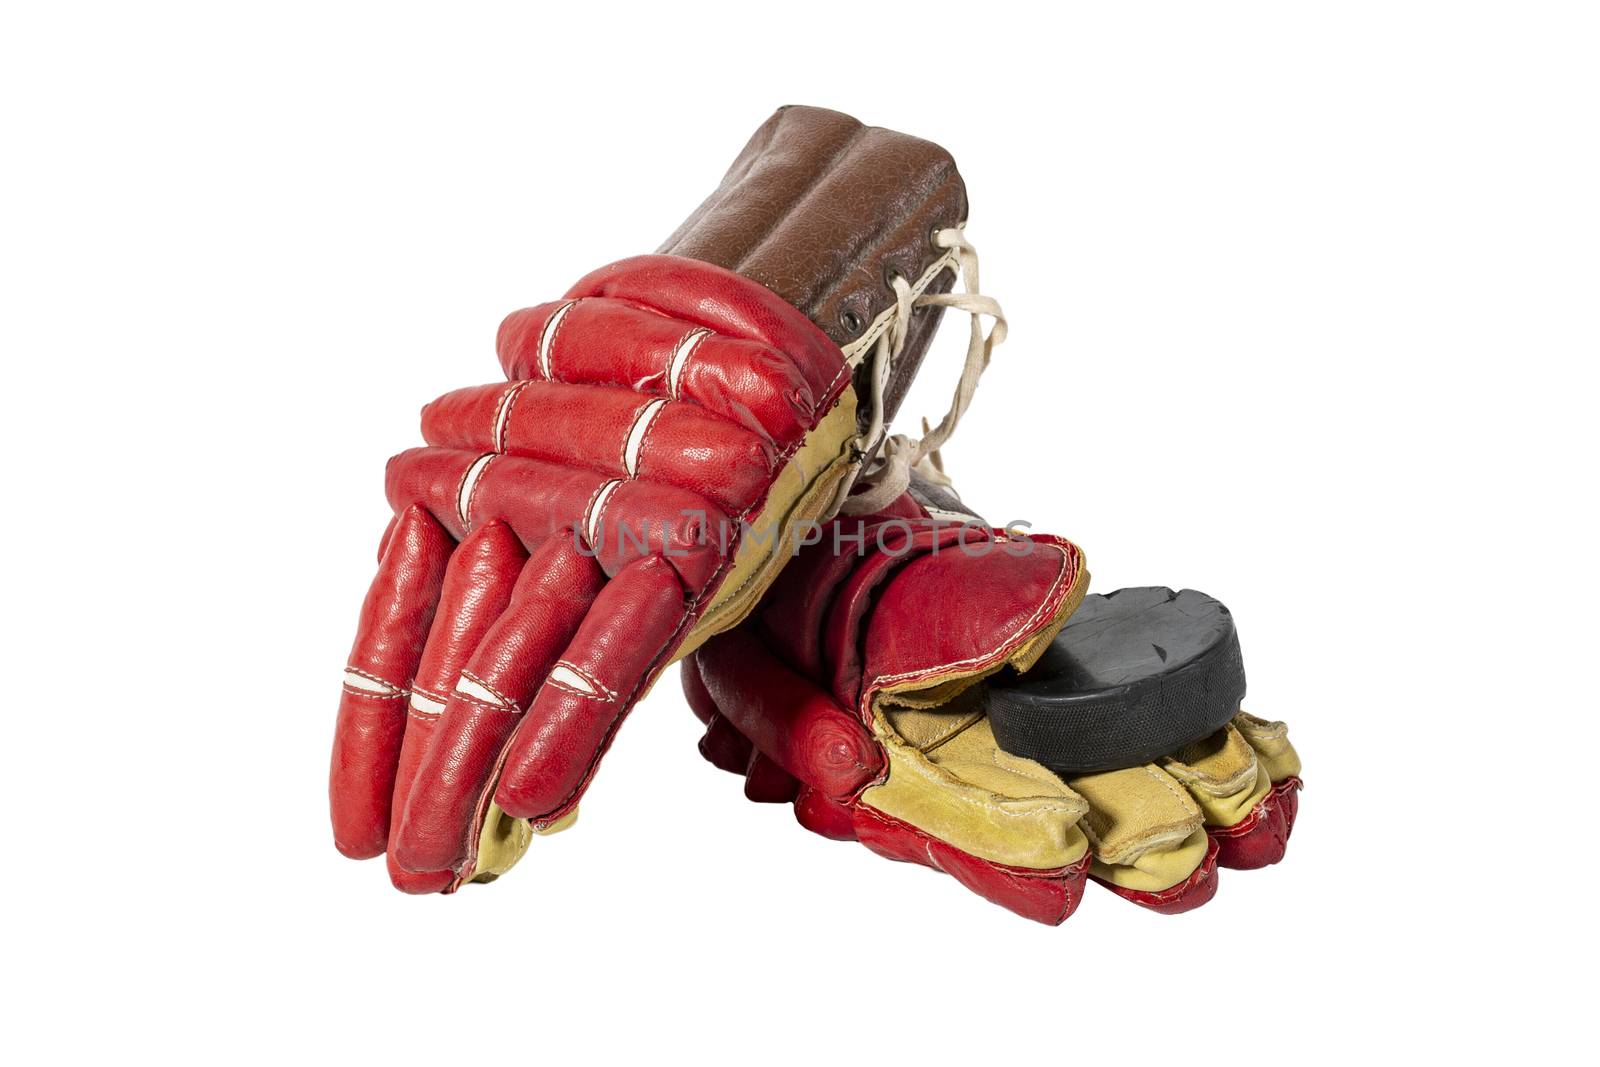 Old red hockey gloves for goalkeeper. Isolated over white background by 977_ReX_977